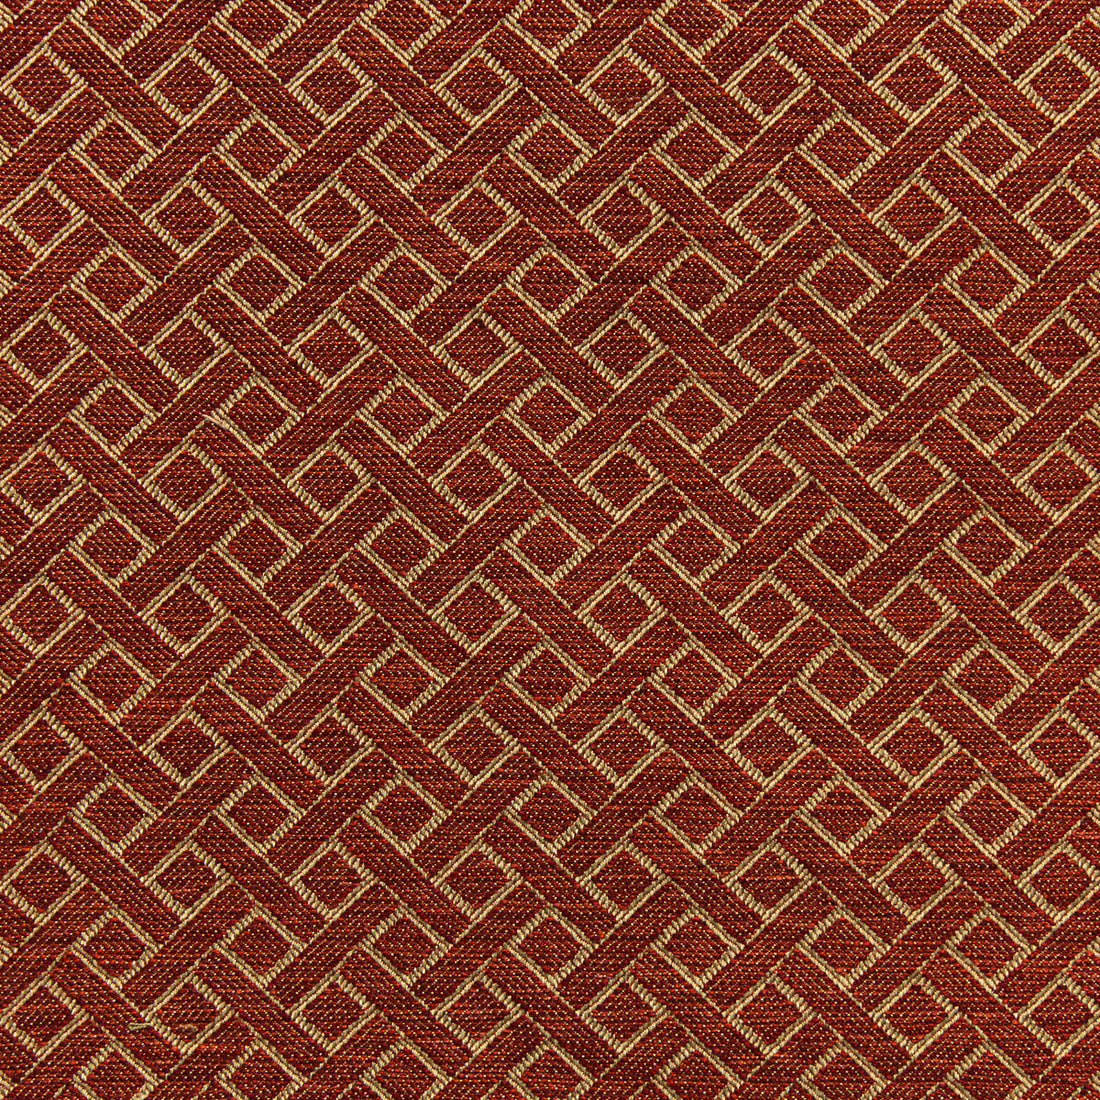 Maldon Weave fabric in brick color - pattern 2020102.919.0 - by Lee Jofa in the Linford Weaves collection